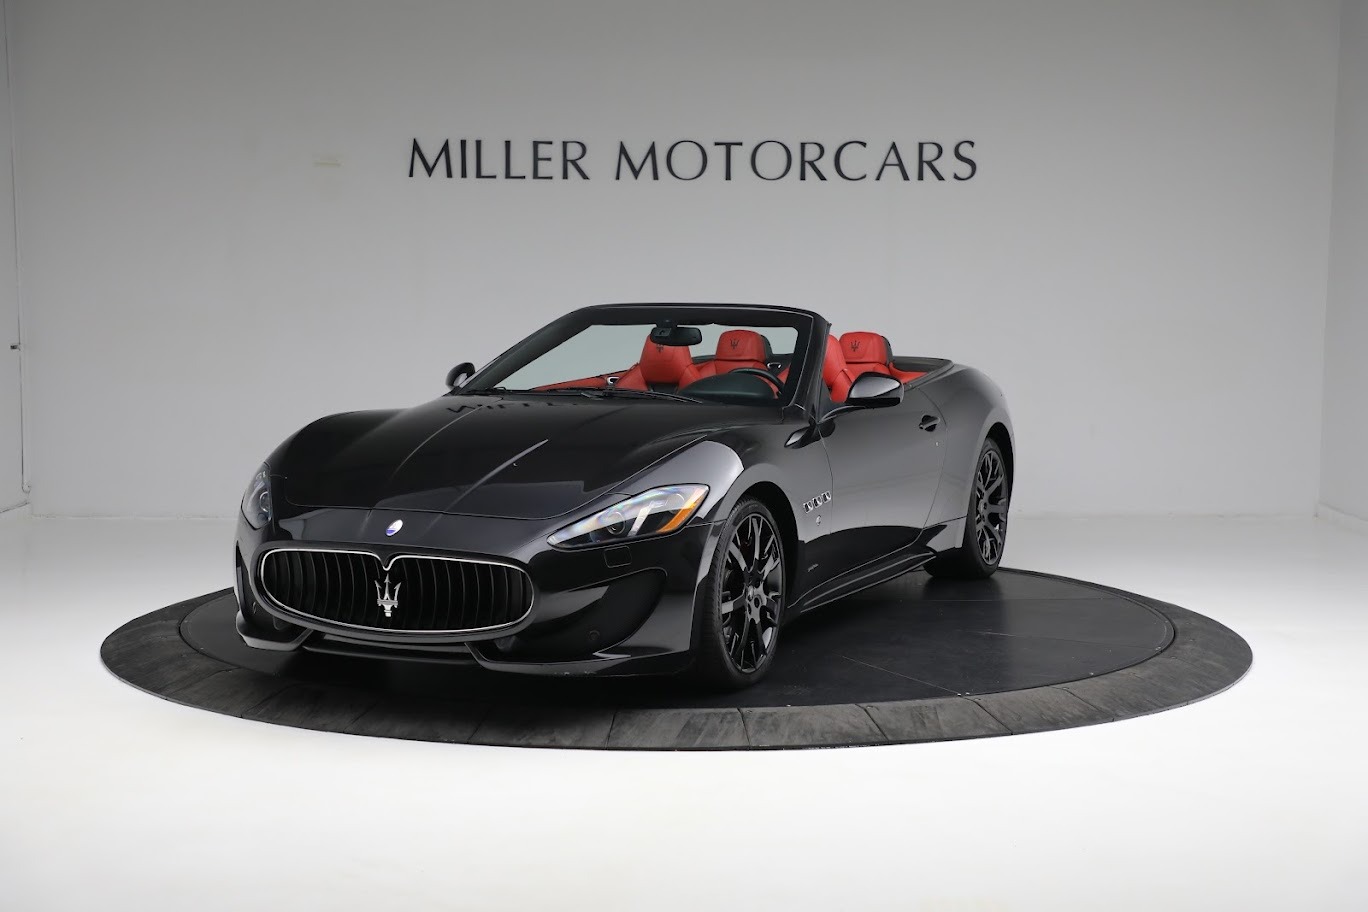 Used 2014 Maserati GranTurismo for sale $79,900 at Rolls-Royce Motor Cars Greenwich in Greenwich CT 06830 1